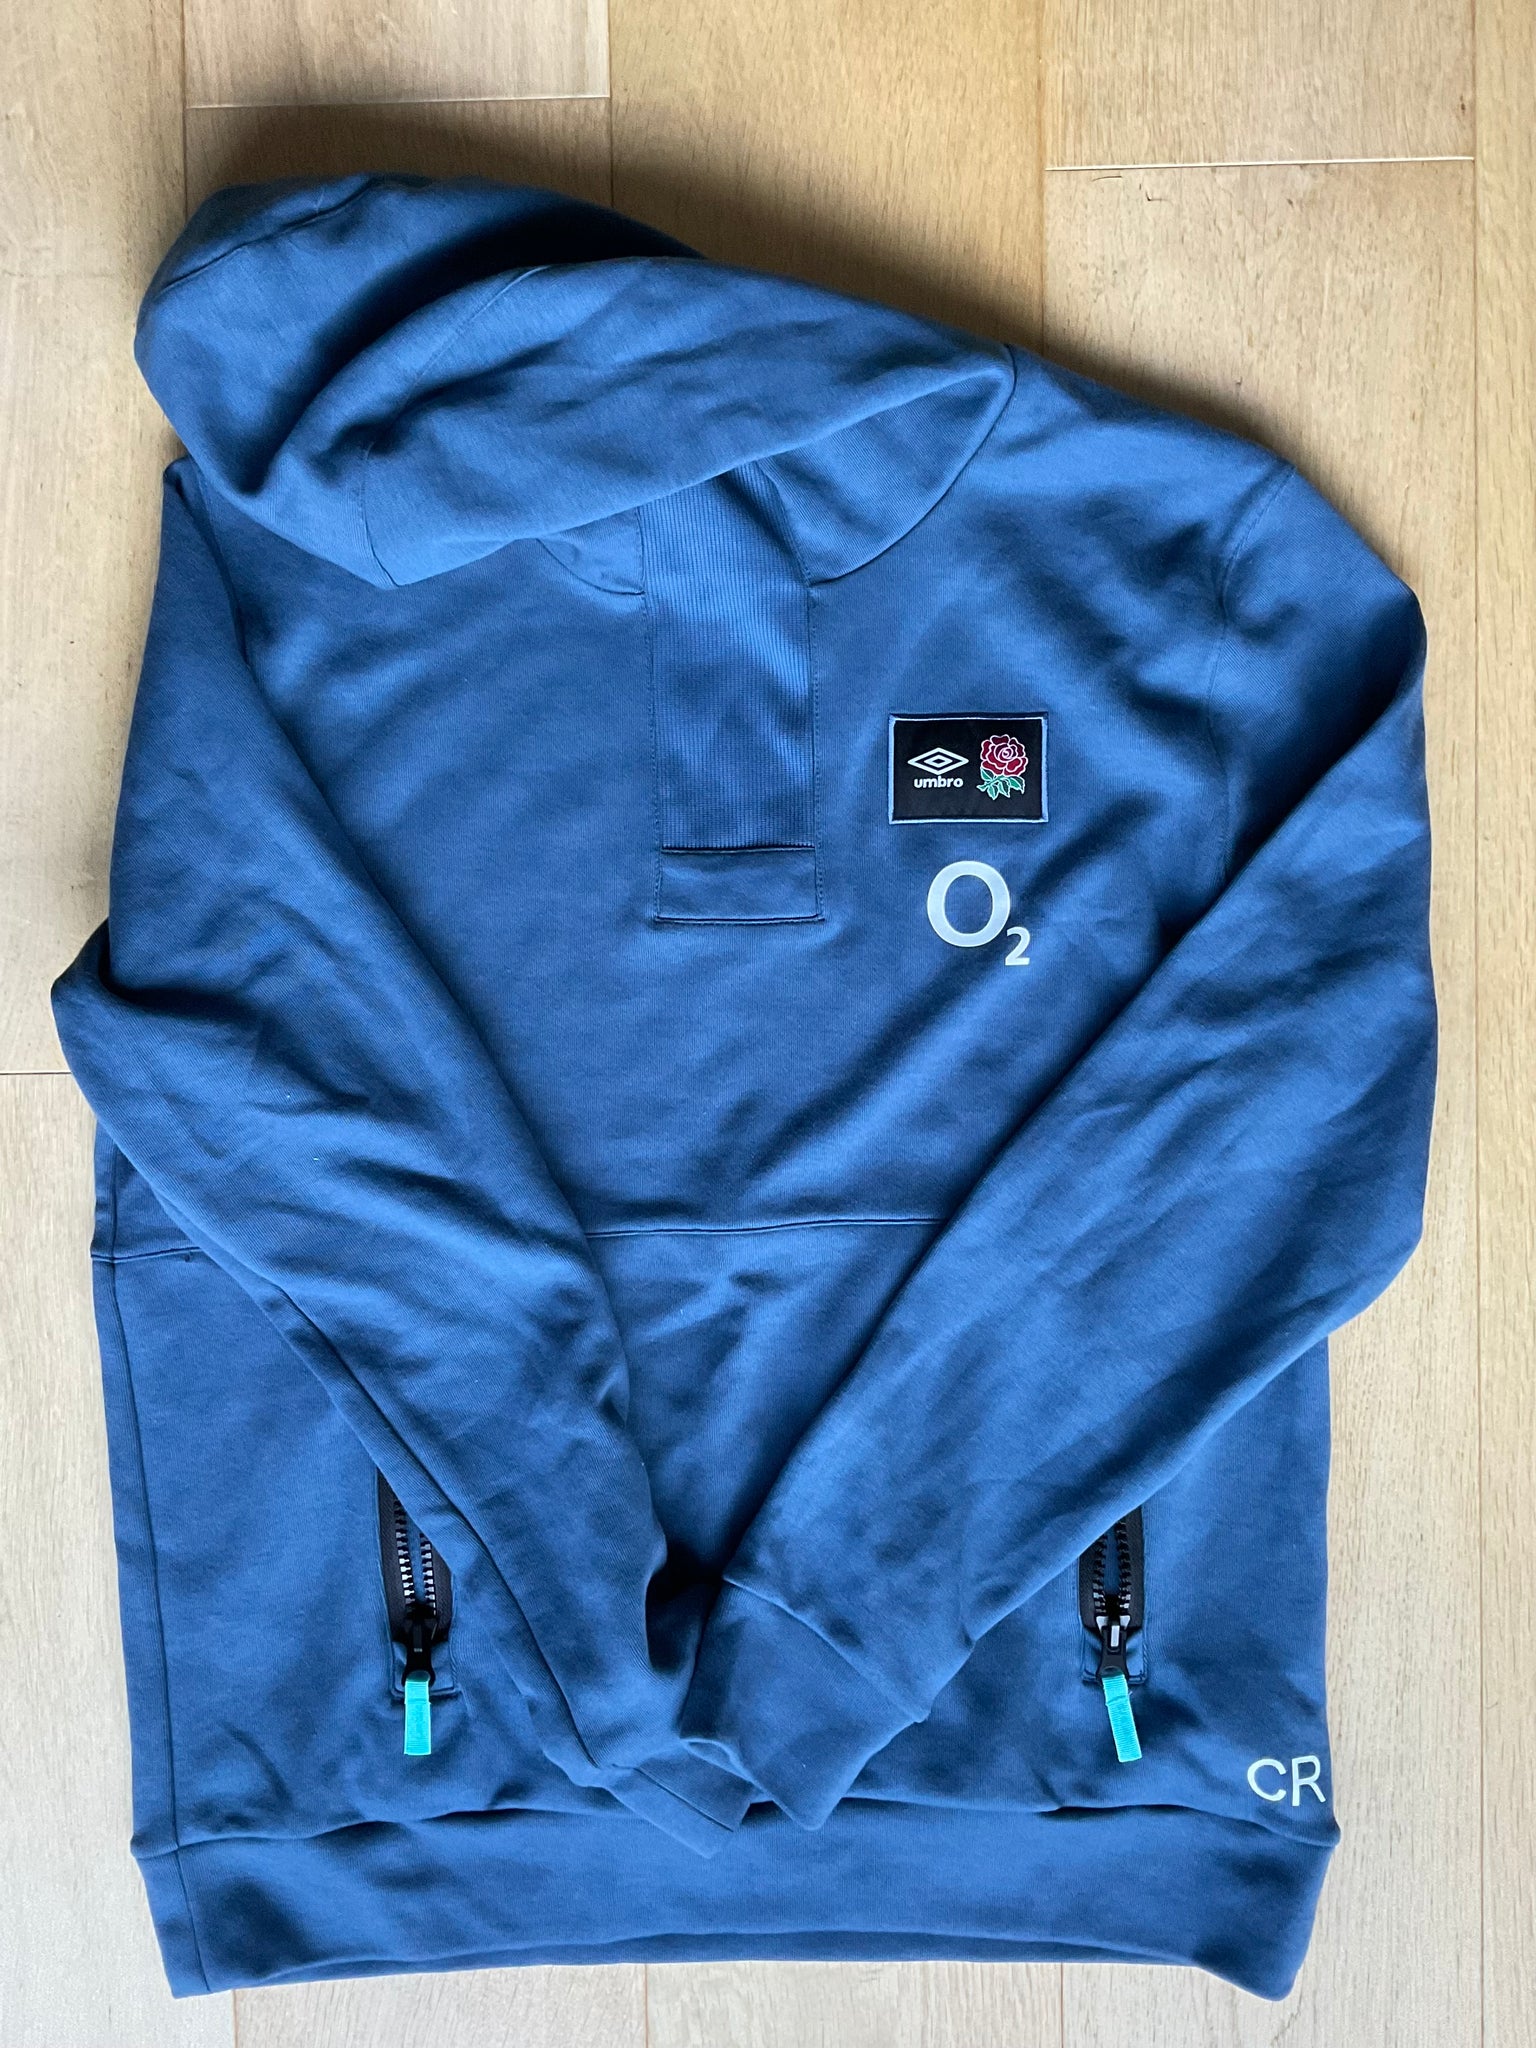 CR Initials - England Rugby Hoodie [Teal]